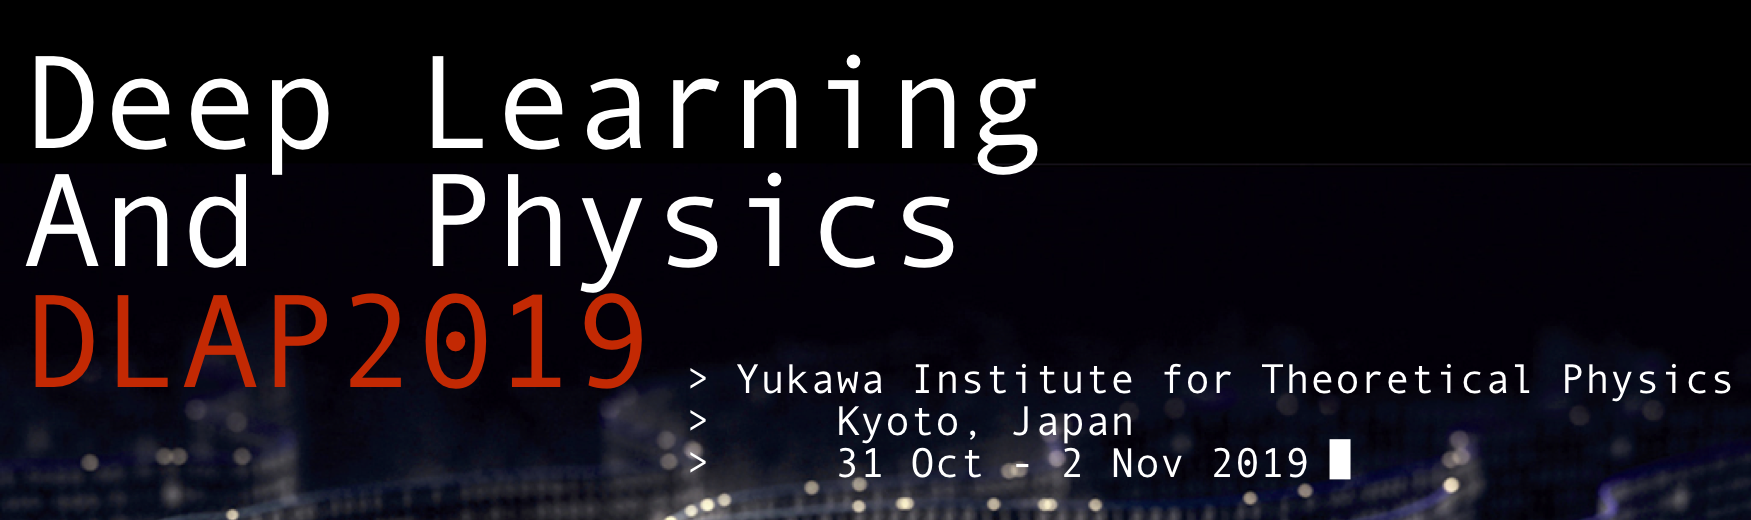 Deep Learning and physics 2019